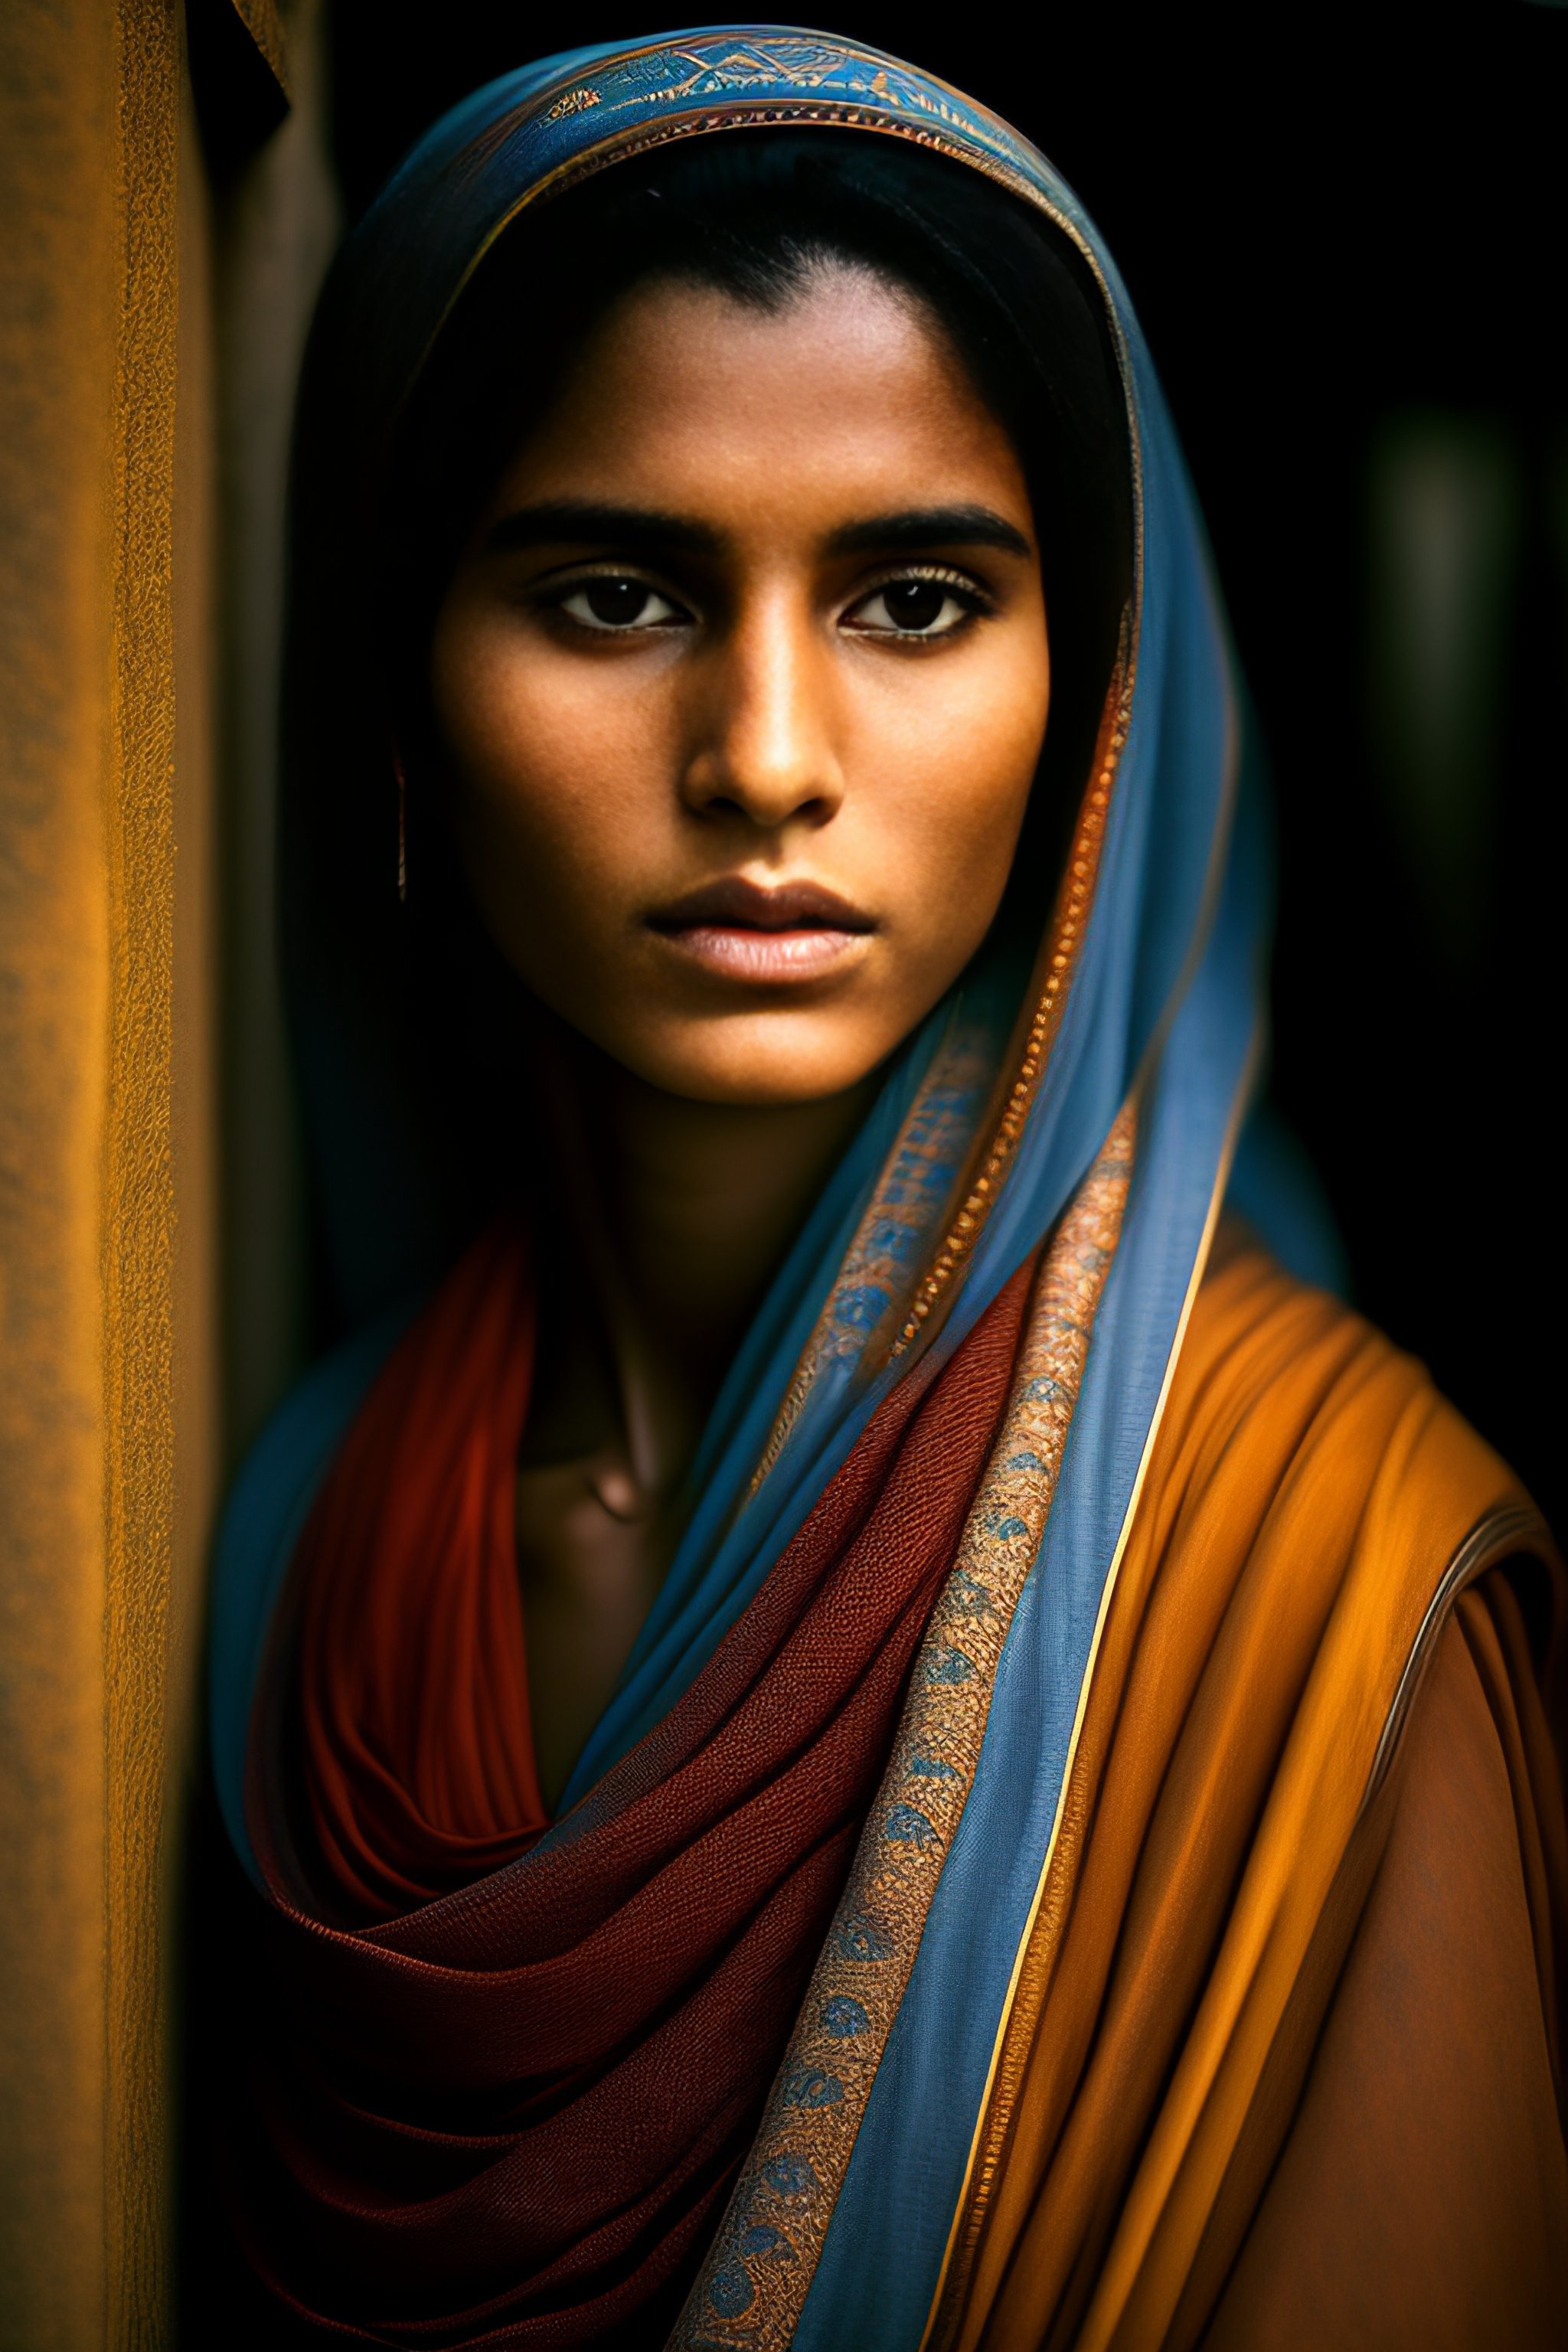 Lexica Award Winning Photo Titled “19 Year Old Woman“ By Steve Mccurry 35mm F28 Insanely 